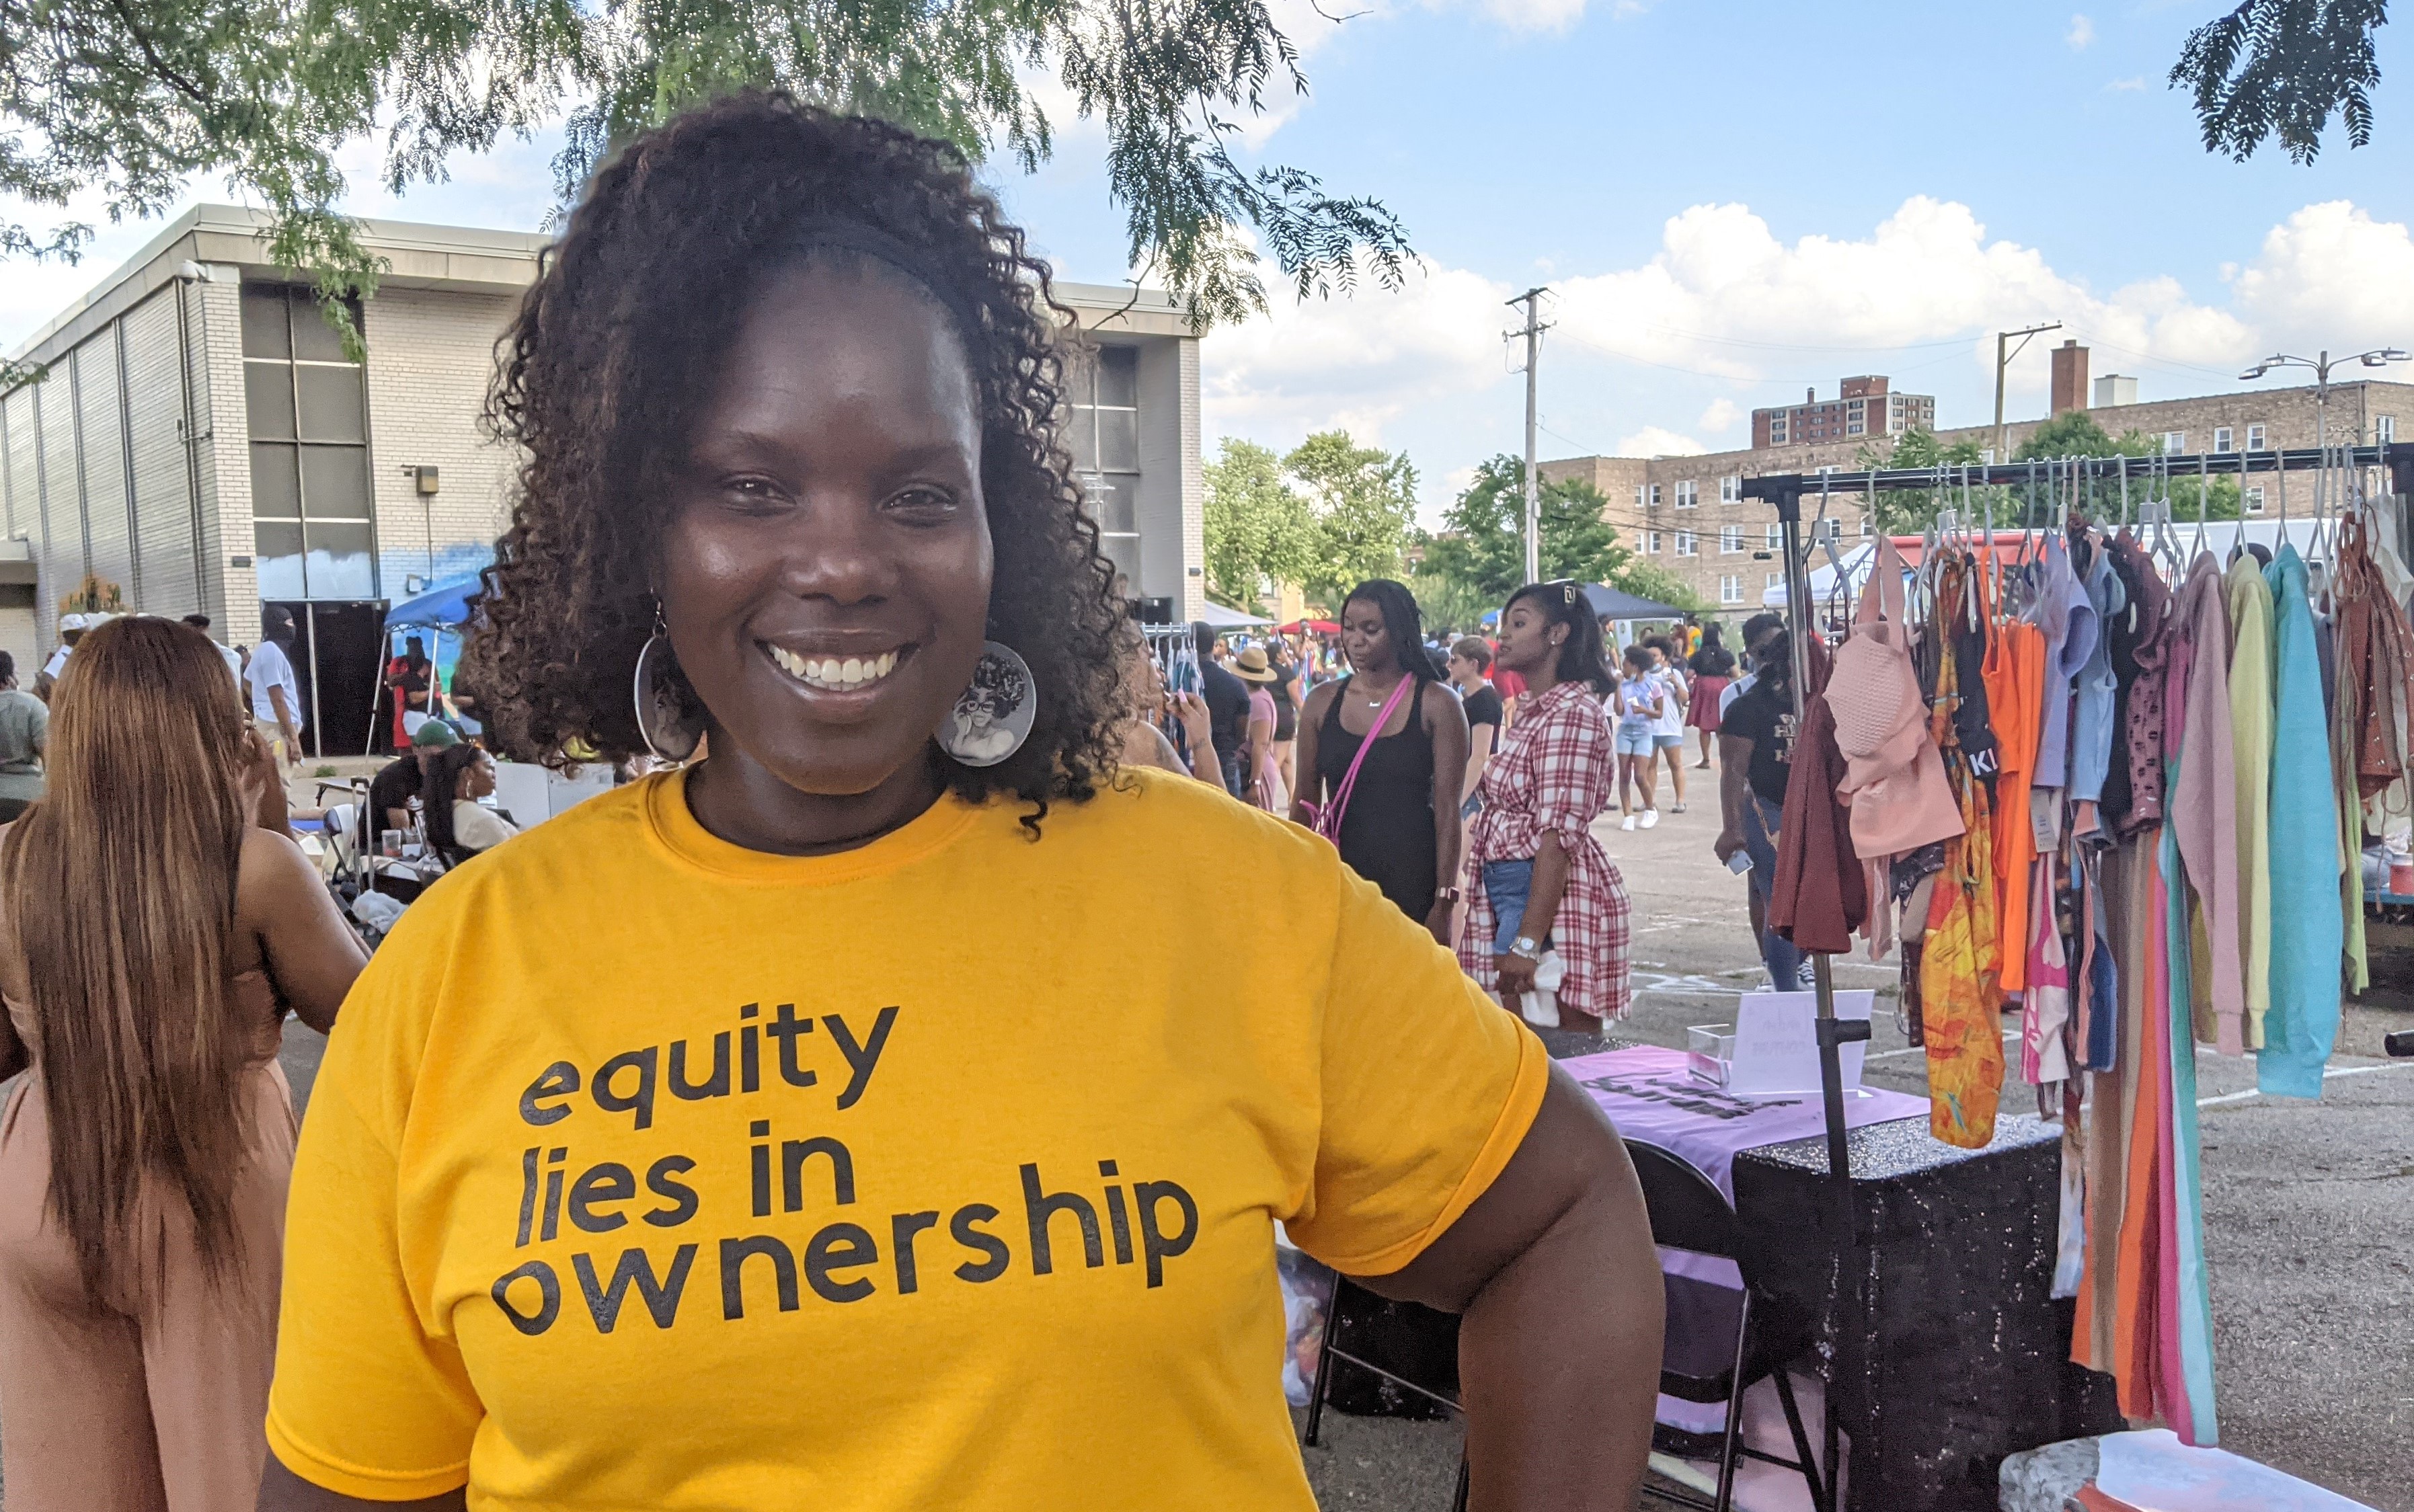 Smiling woman at outdoor festival with yellow t-shirt that says, "equity lies in ownership."